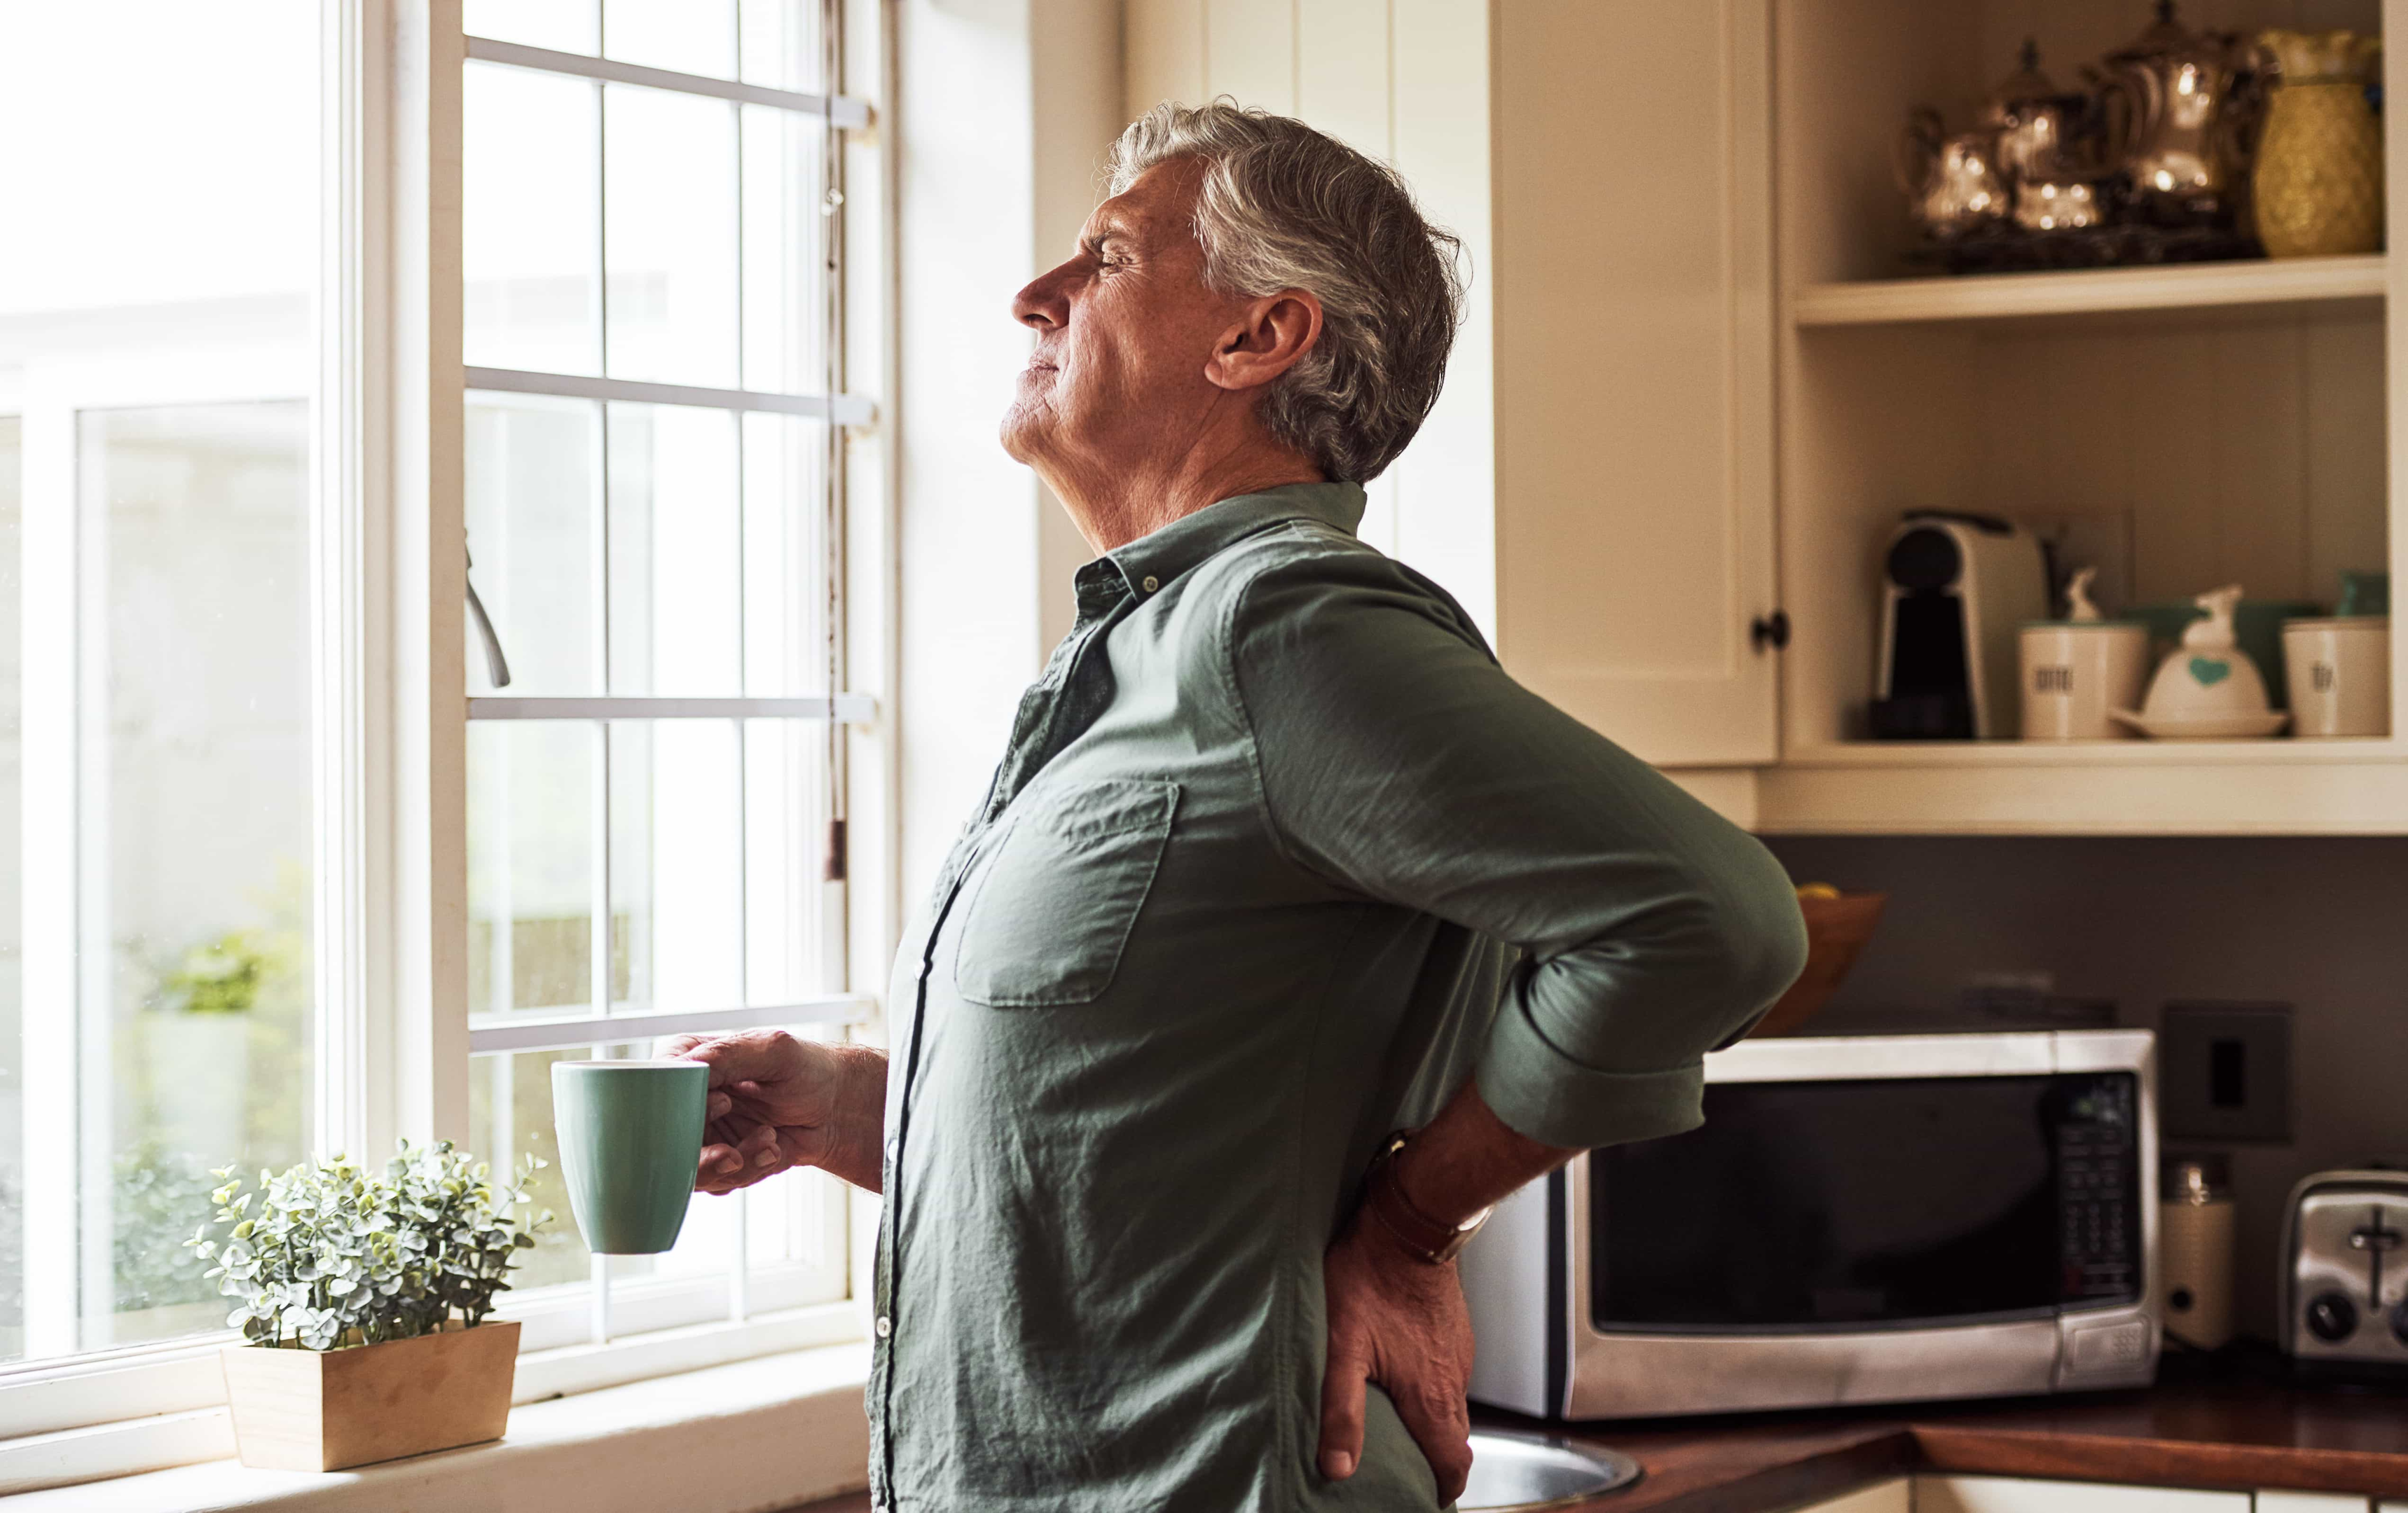 Older man experiencing chronic aching and stiffness in the morning. He is holding a coffee and clutching his lower back in pain.